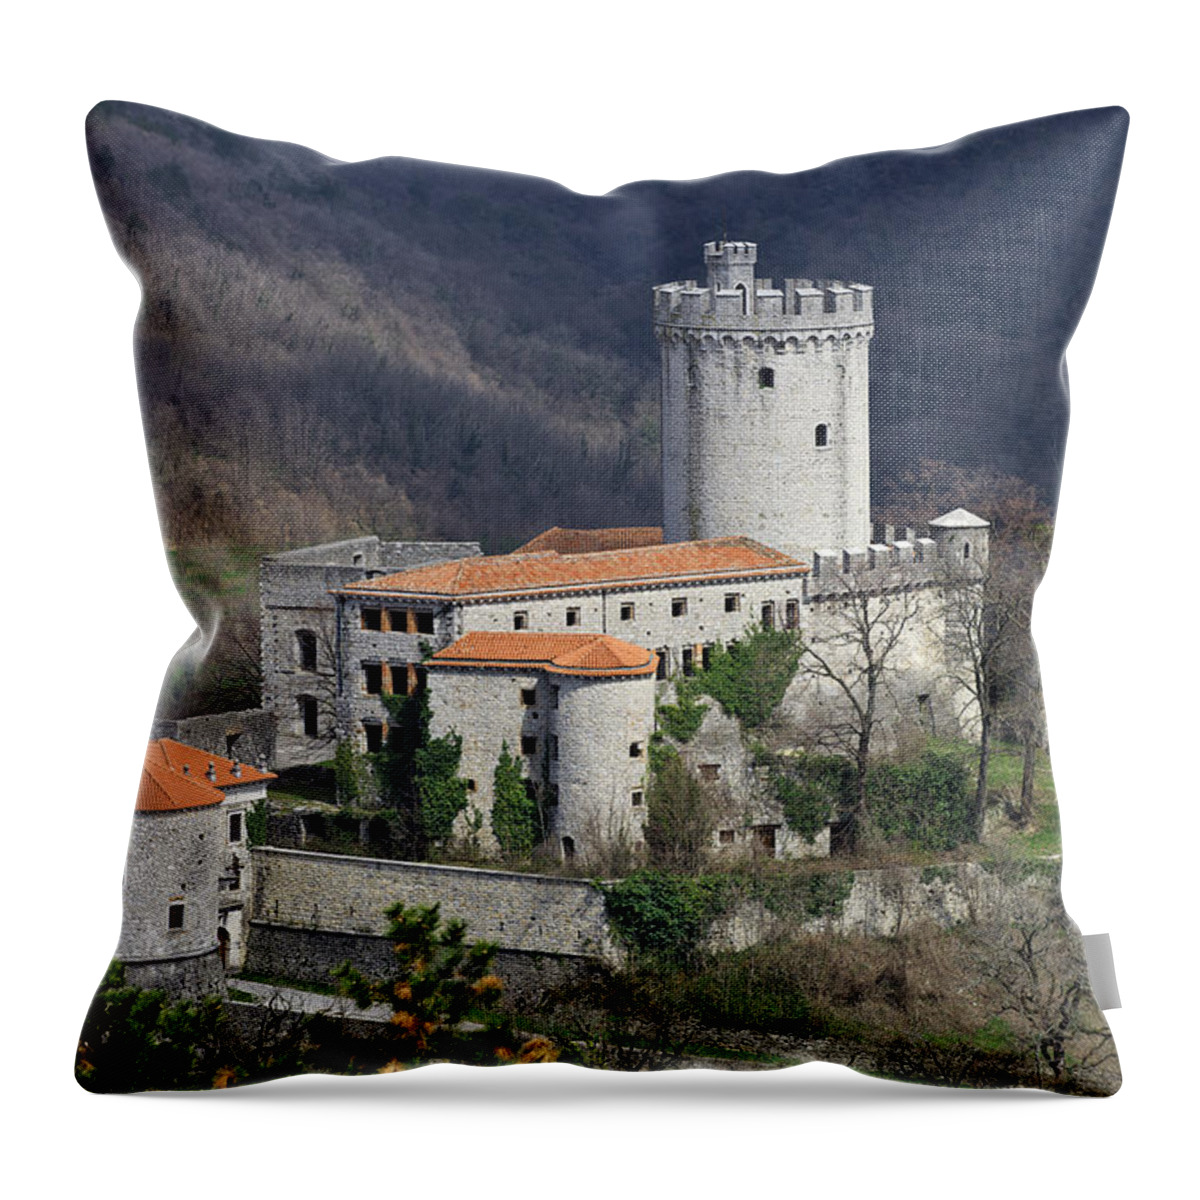 Attraction Throw Pillow featuring the photograph Rihemberk Castle by Ivan Slosar